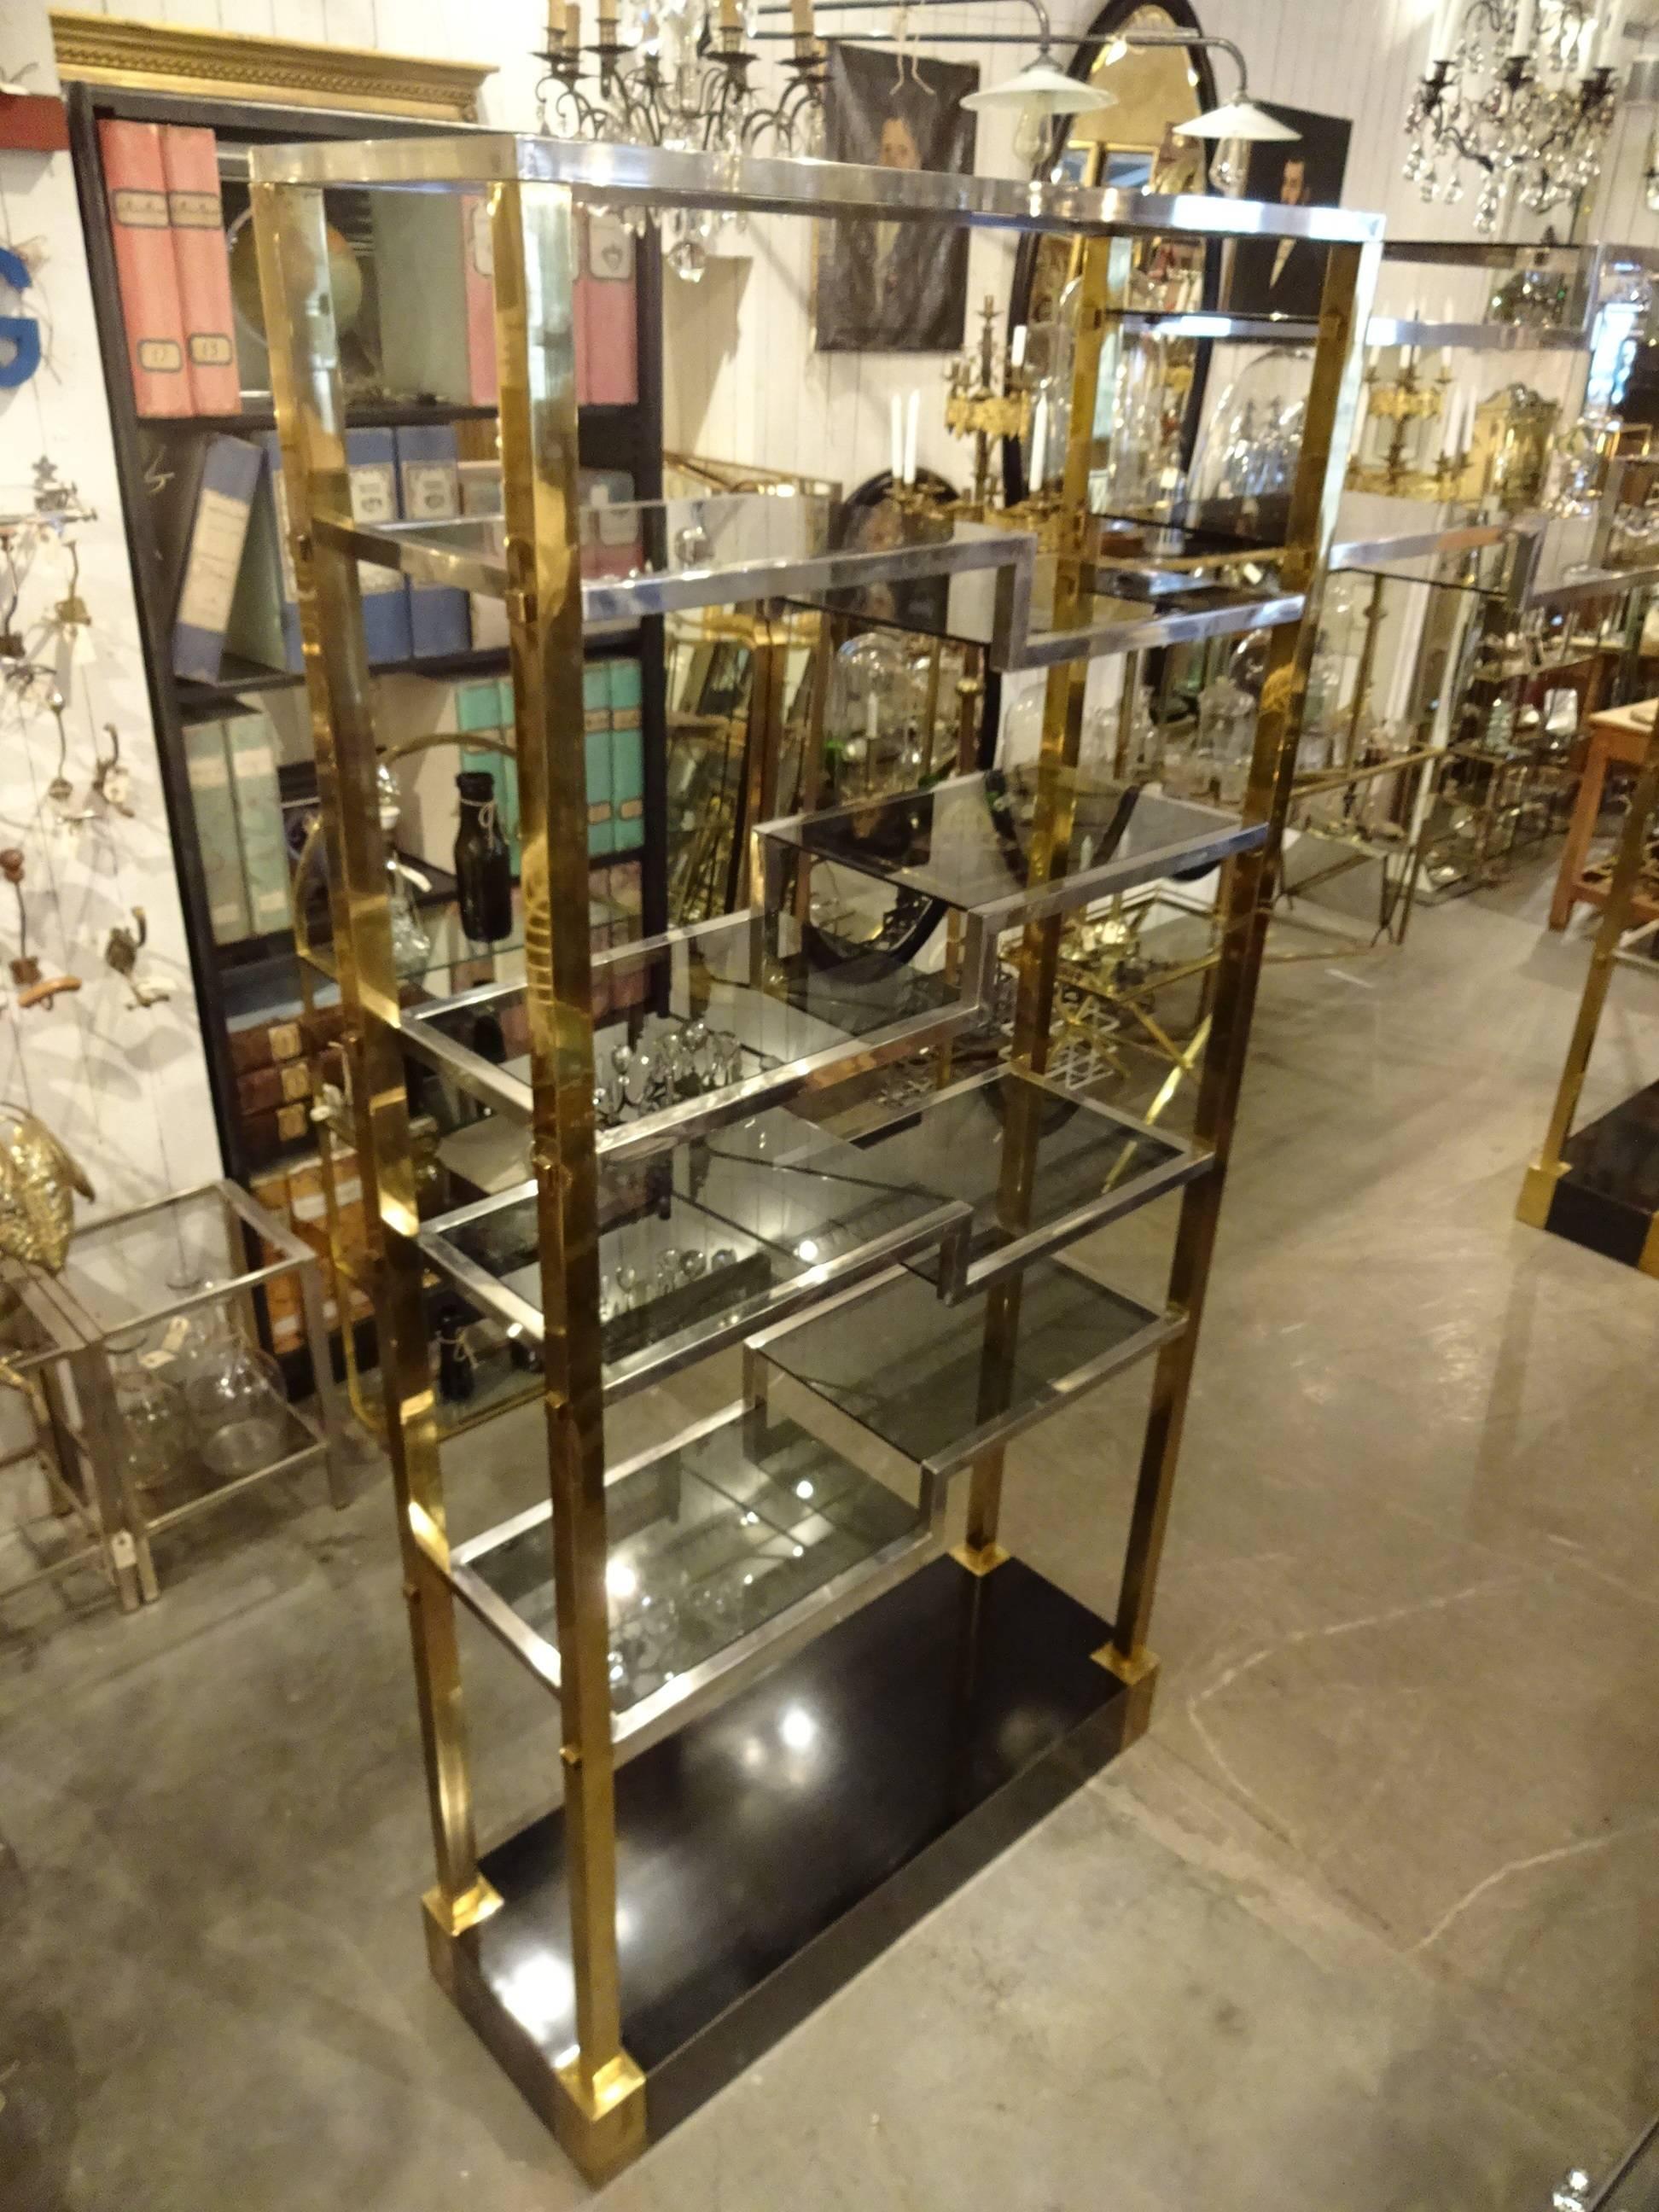 Huge and unique Mid-Century French brass and chrome shelving unit from the 1950s. This gorgeous piece has lovely detailing and consists of two large units united by one long shelving unit. It would be a showstopper in either a shop or a private